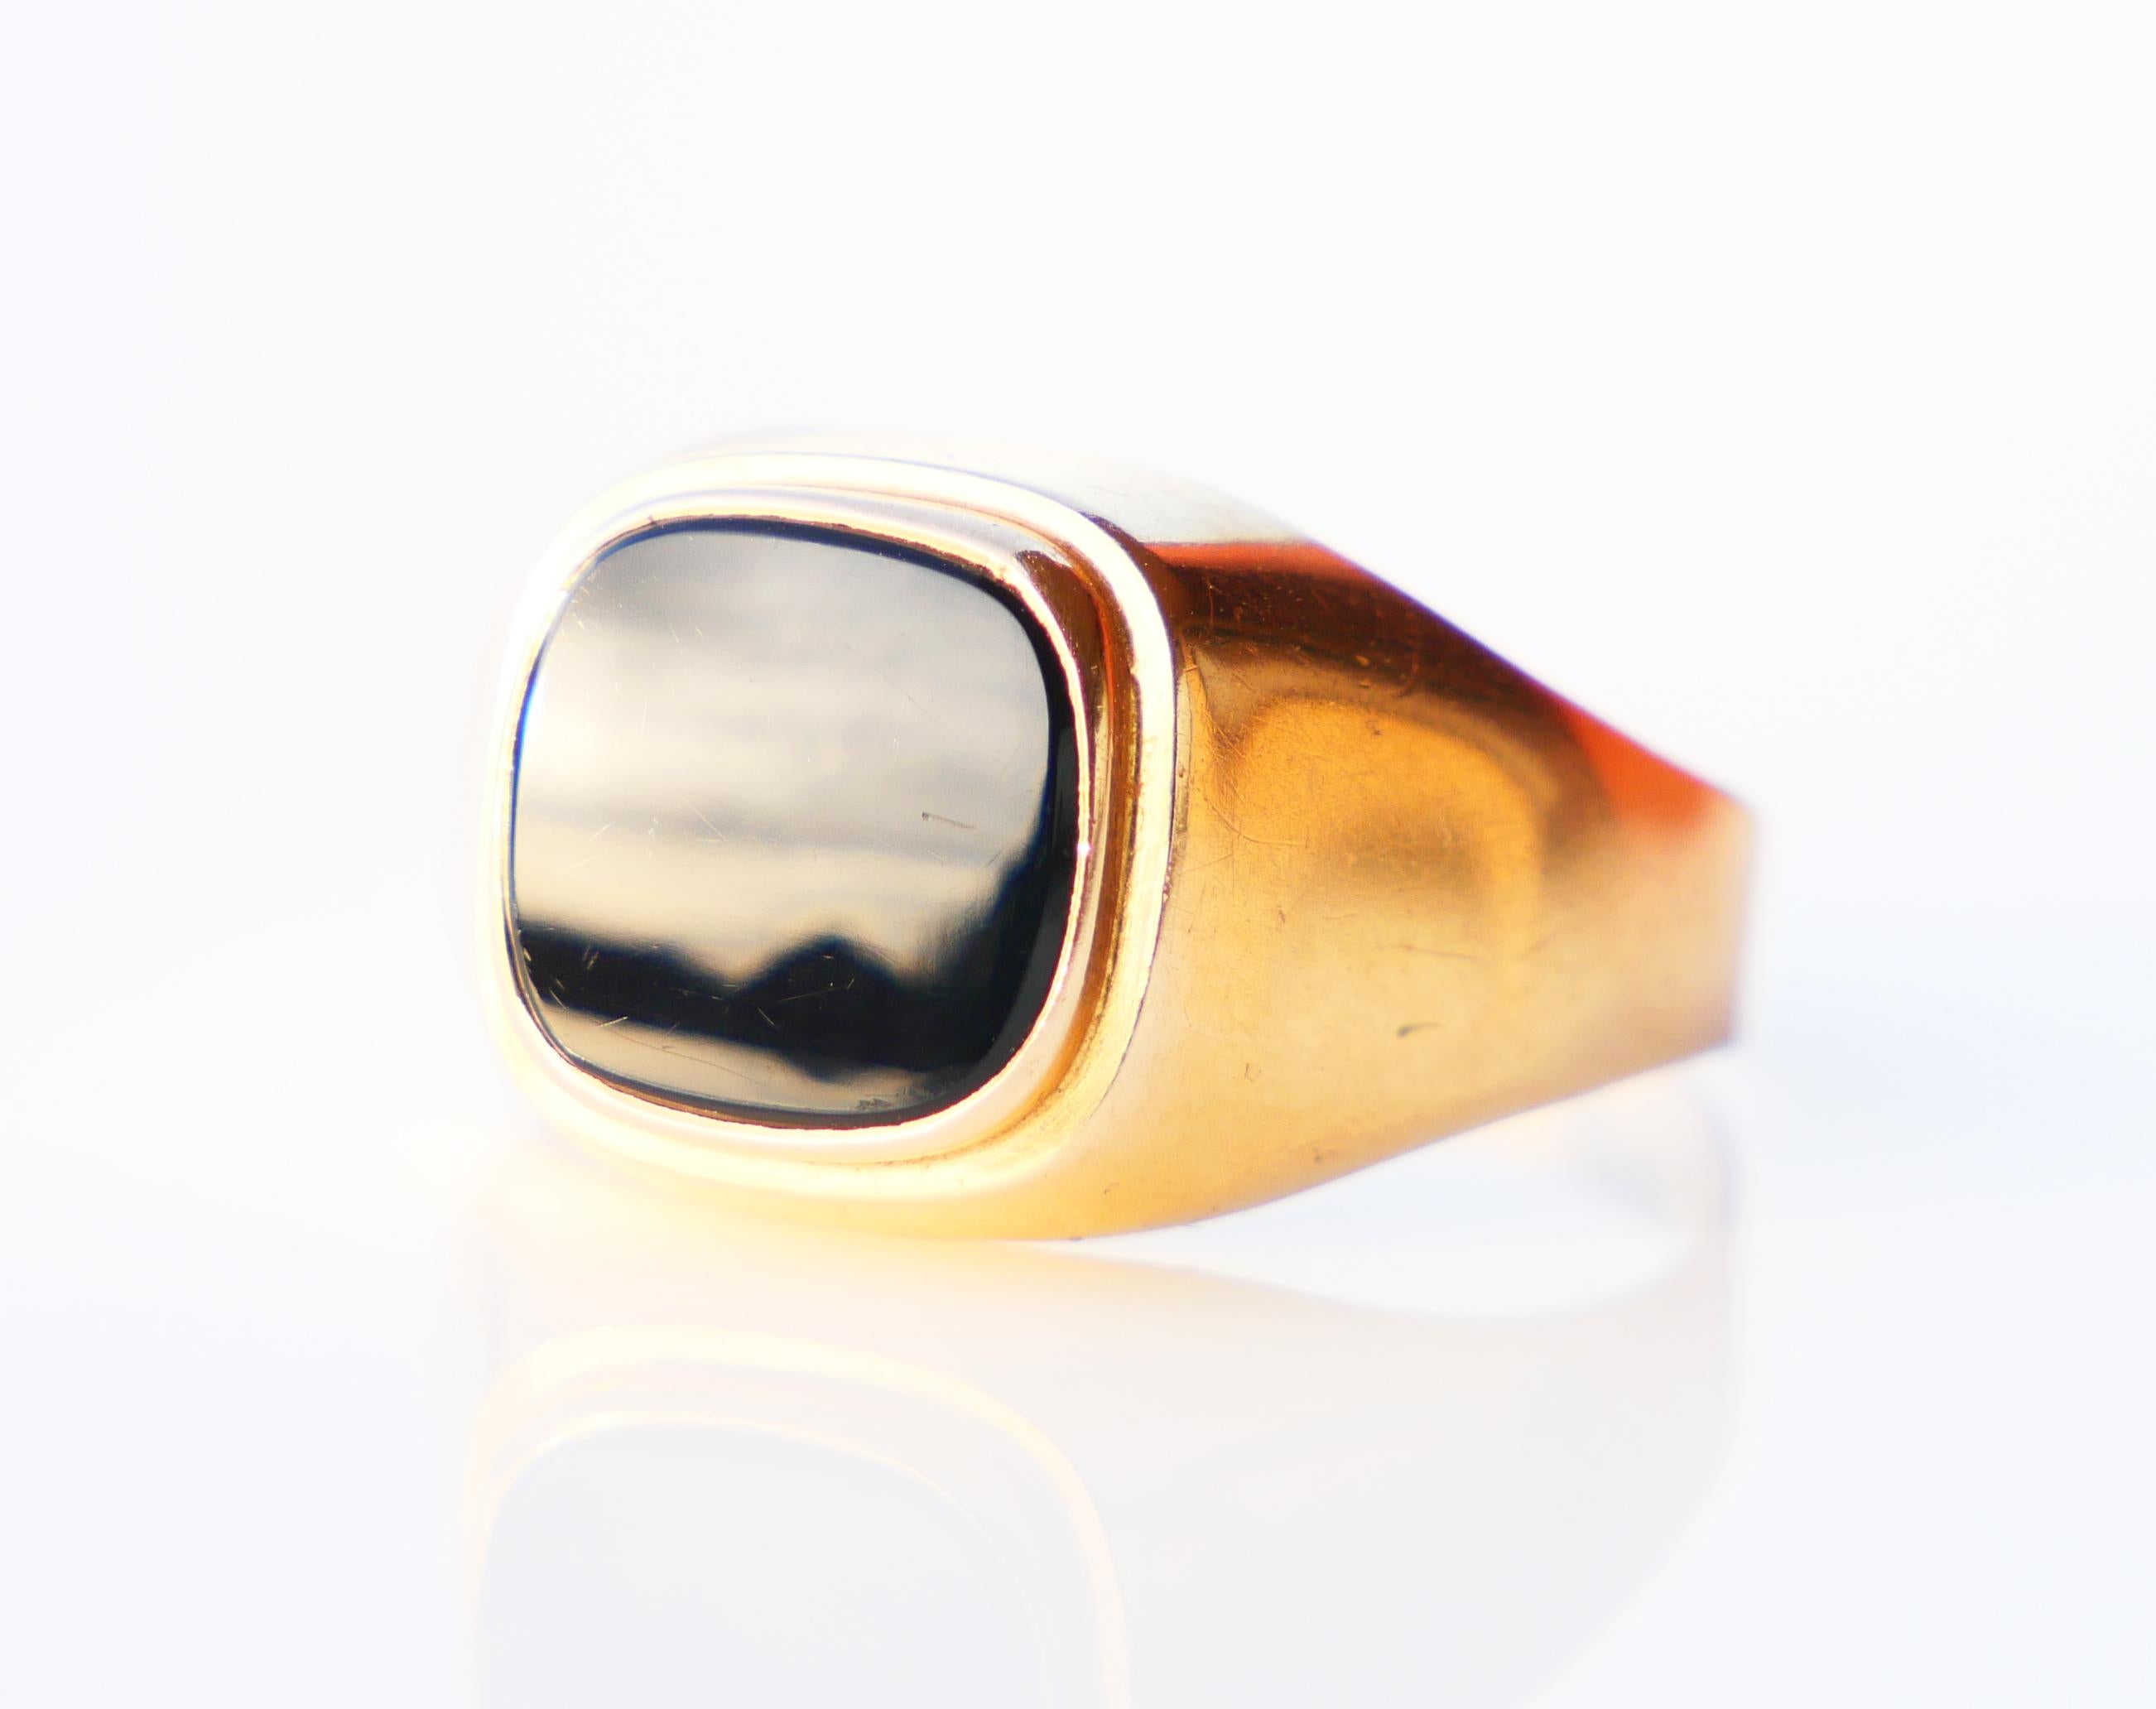 Men Signet Ring in elegant design  decorated with highly reflective stone.

Full set of Swedish hallmarks , 18k, maker's and date code is S8 / made in 1944.

Crown is 18 mm x 15 mm x 4mm, with engraved decor on the edge.Orange Gold, radiant cut